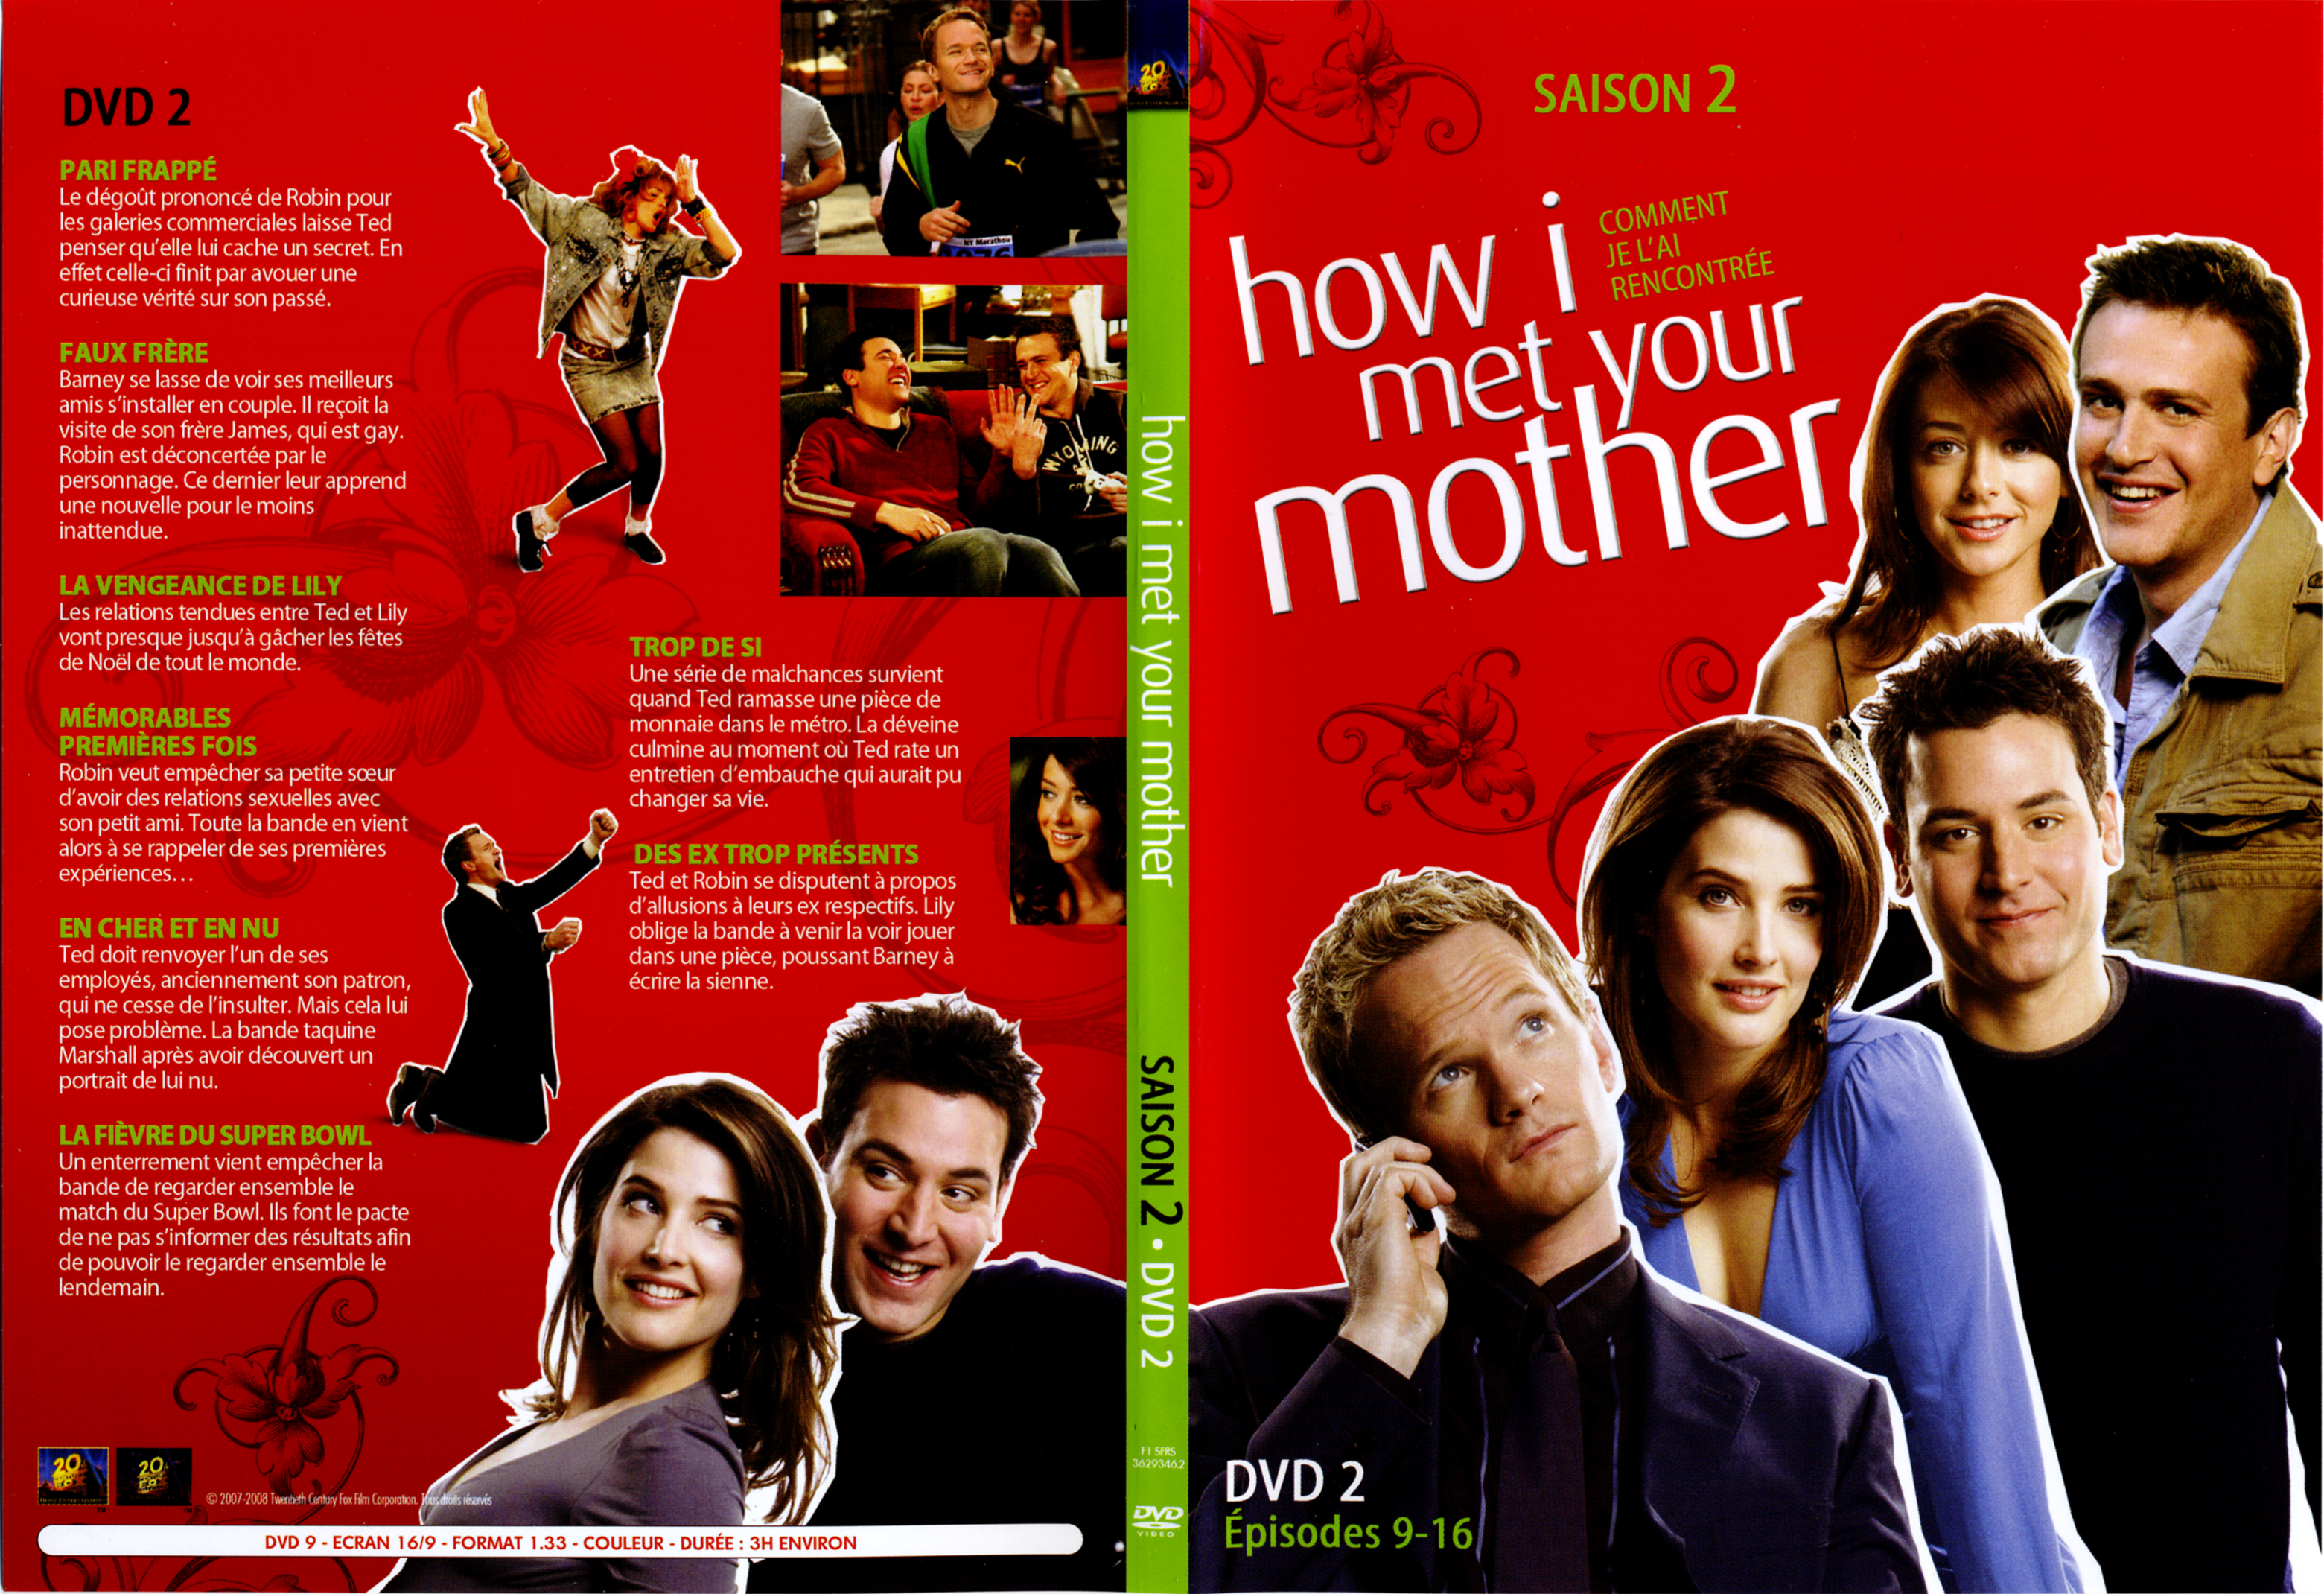 Jaquette DVD How i met your mother Saison 2 DVD 2